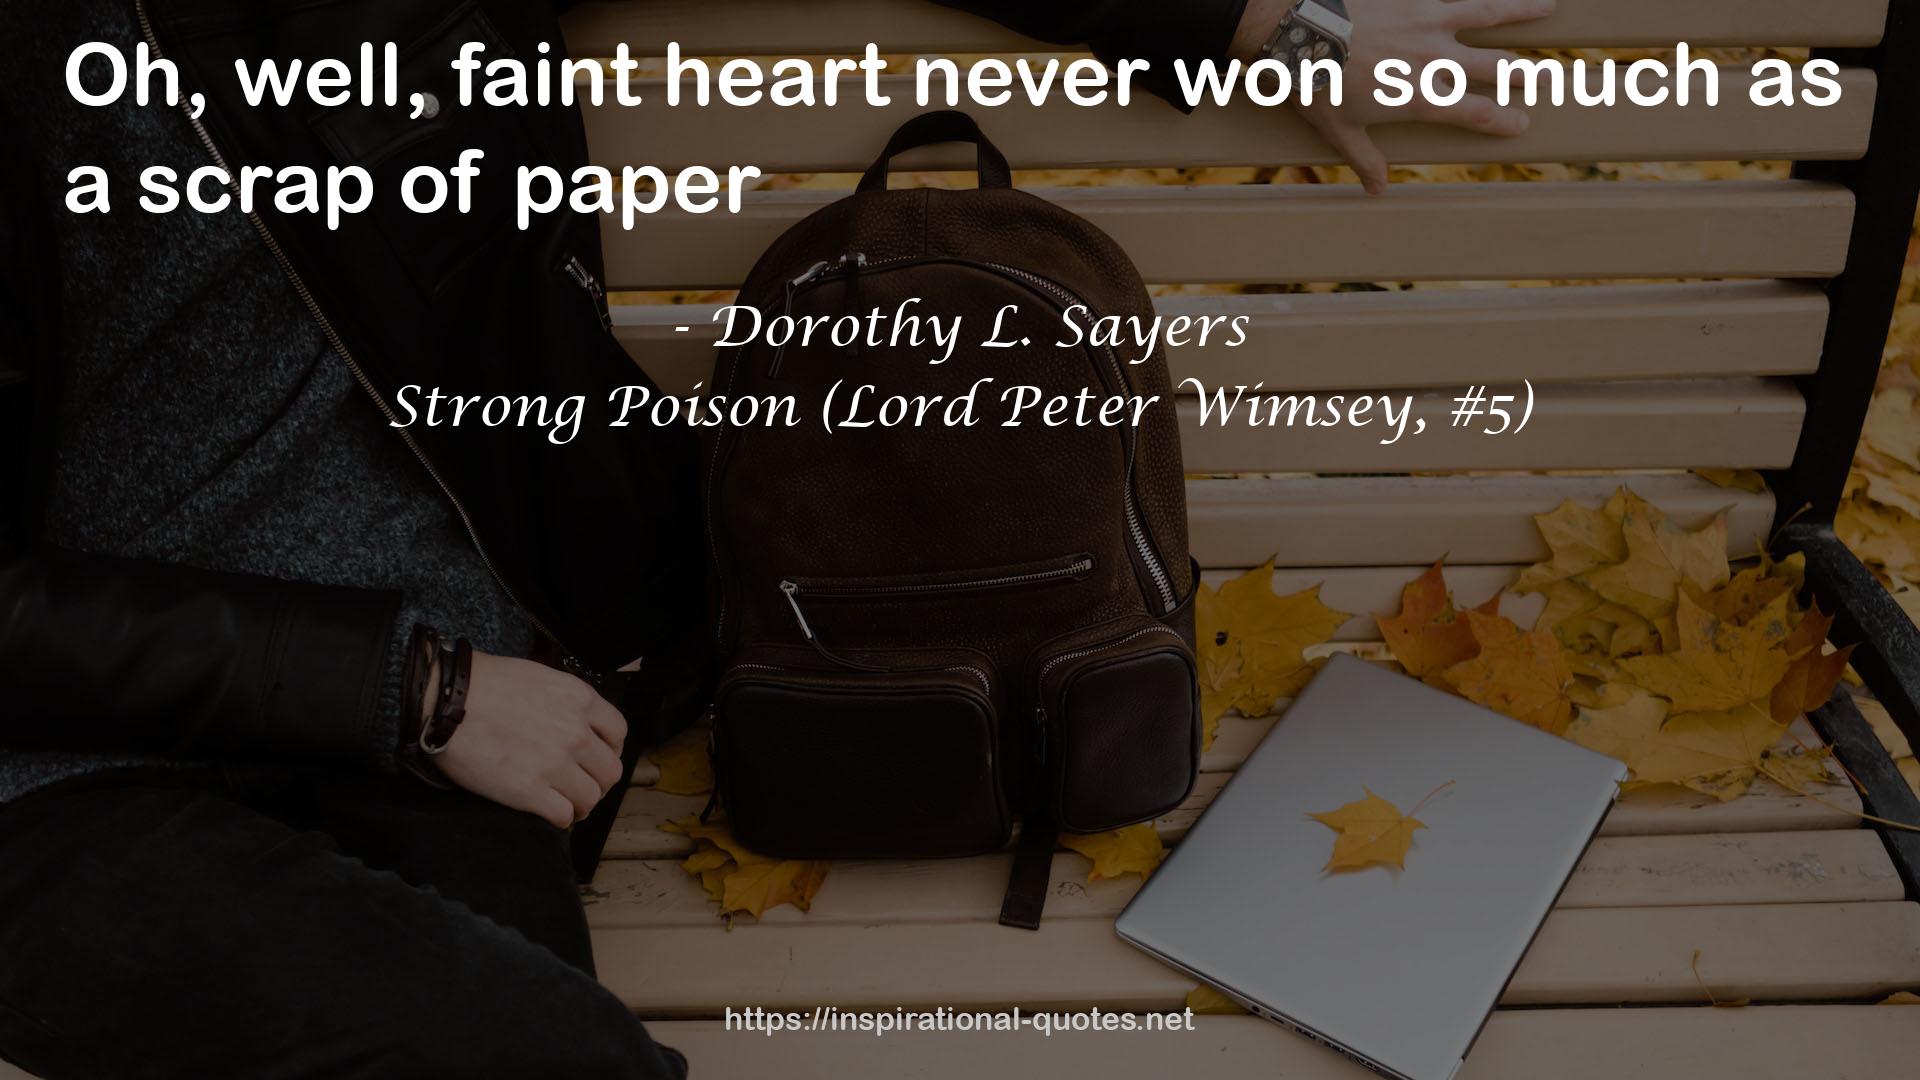 Strong Poison (Lord Peter Wimsey, #5) QUOTES